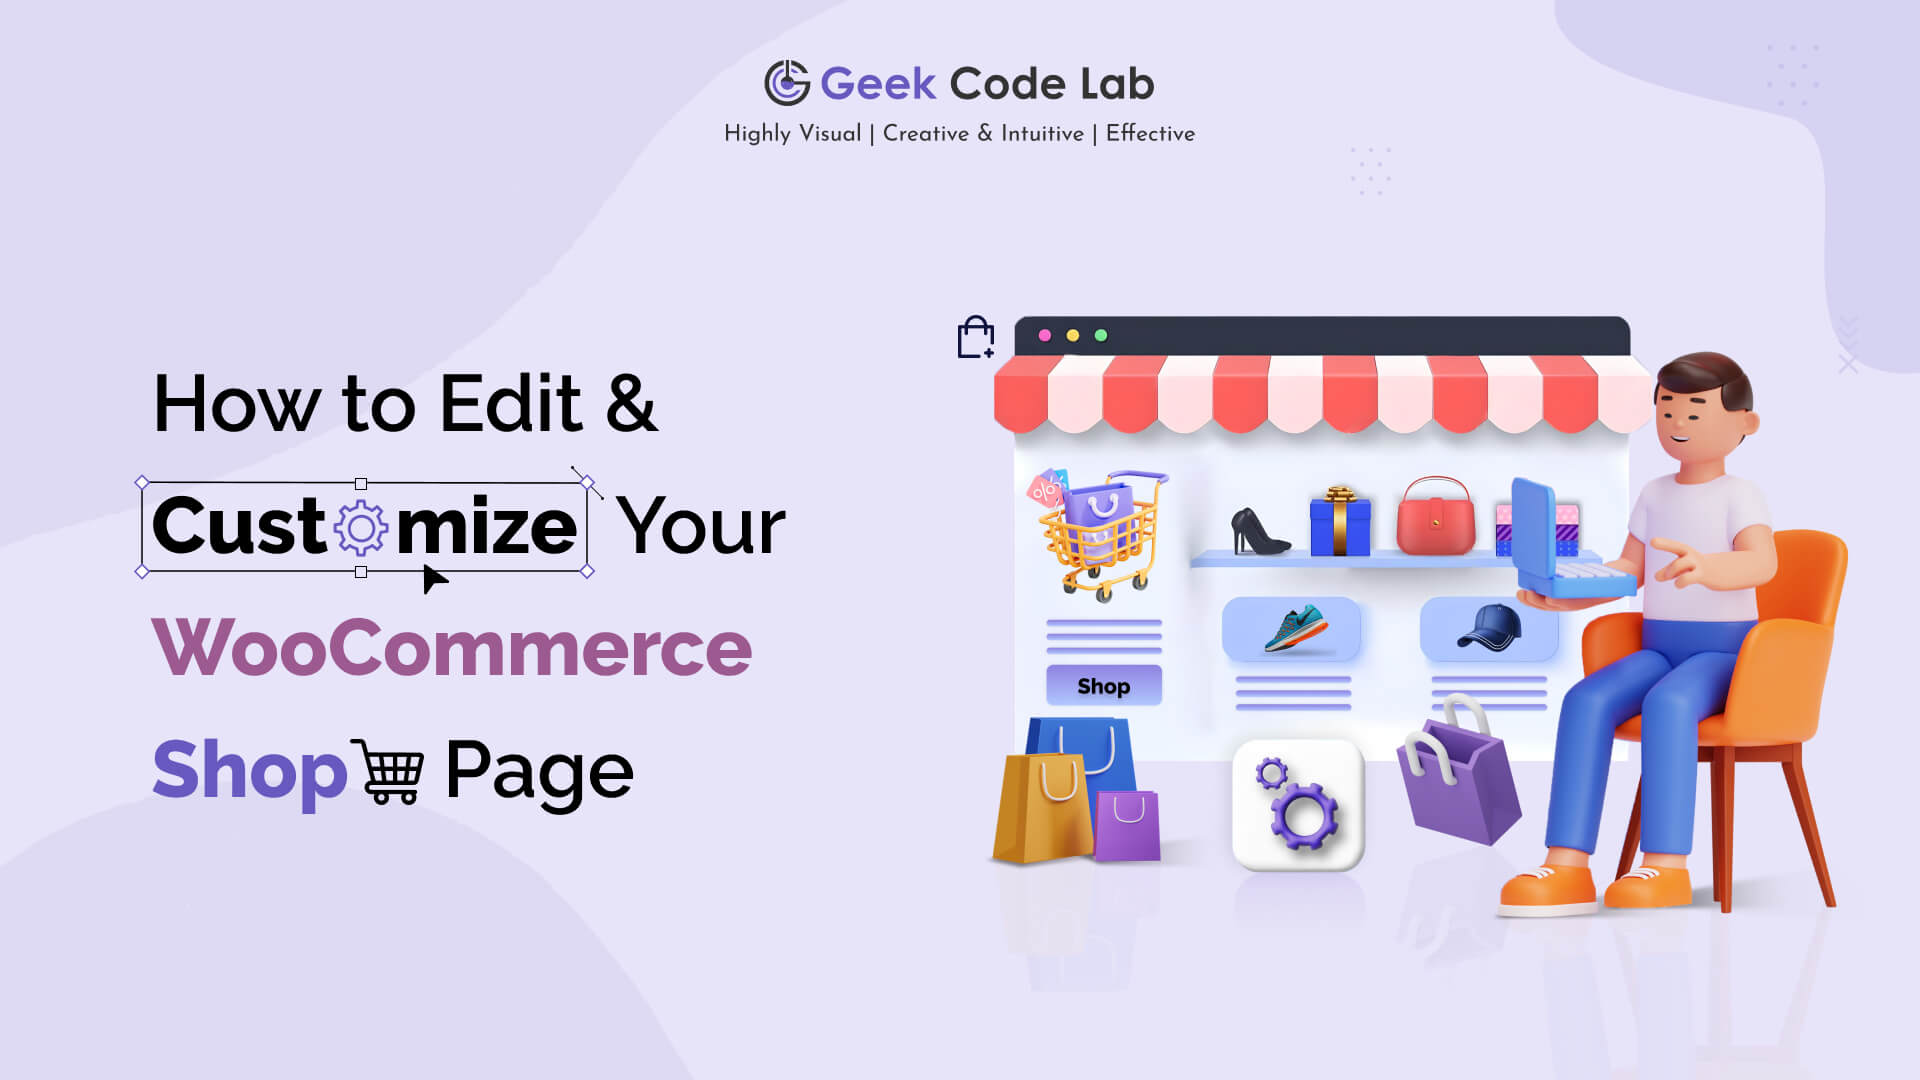 How to Customize WooCommerce Page using Shop Page Customizer Plugin